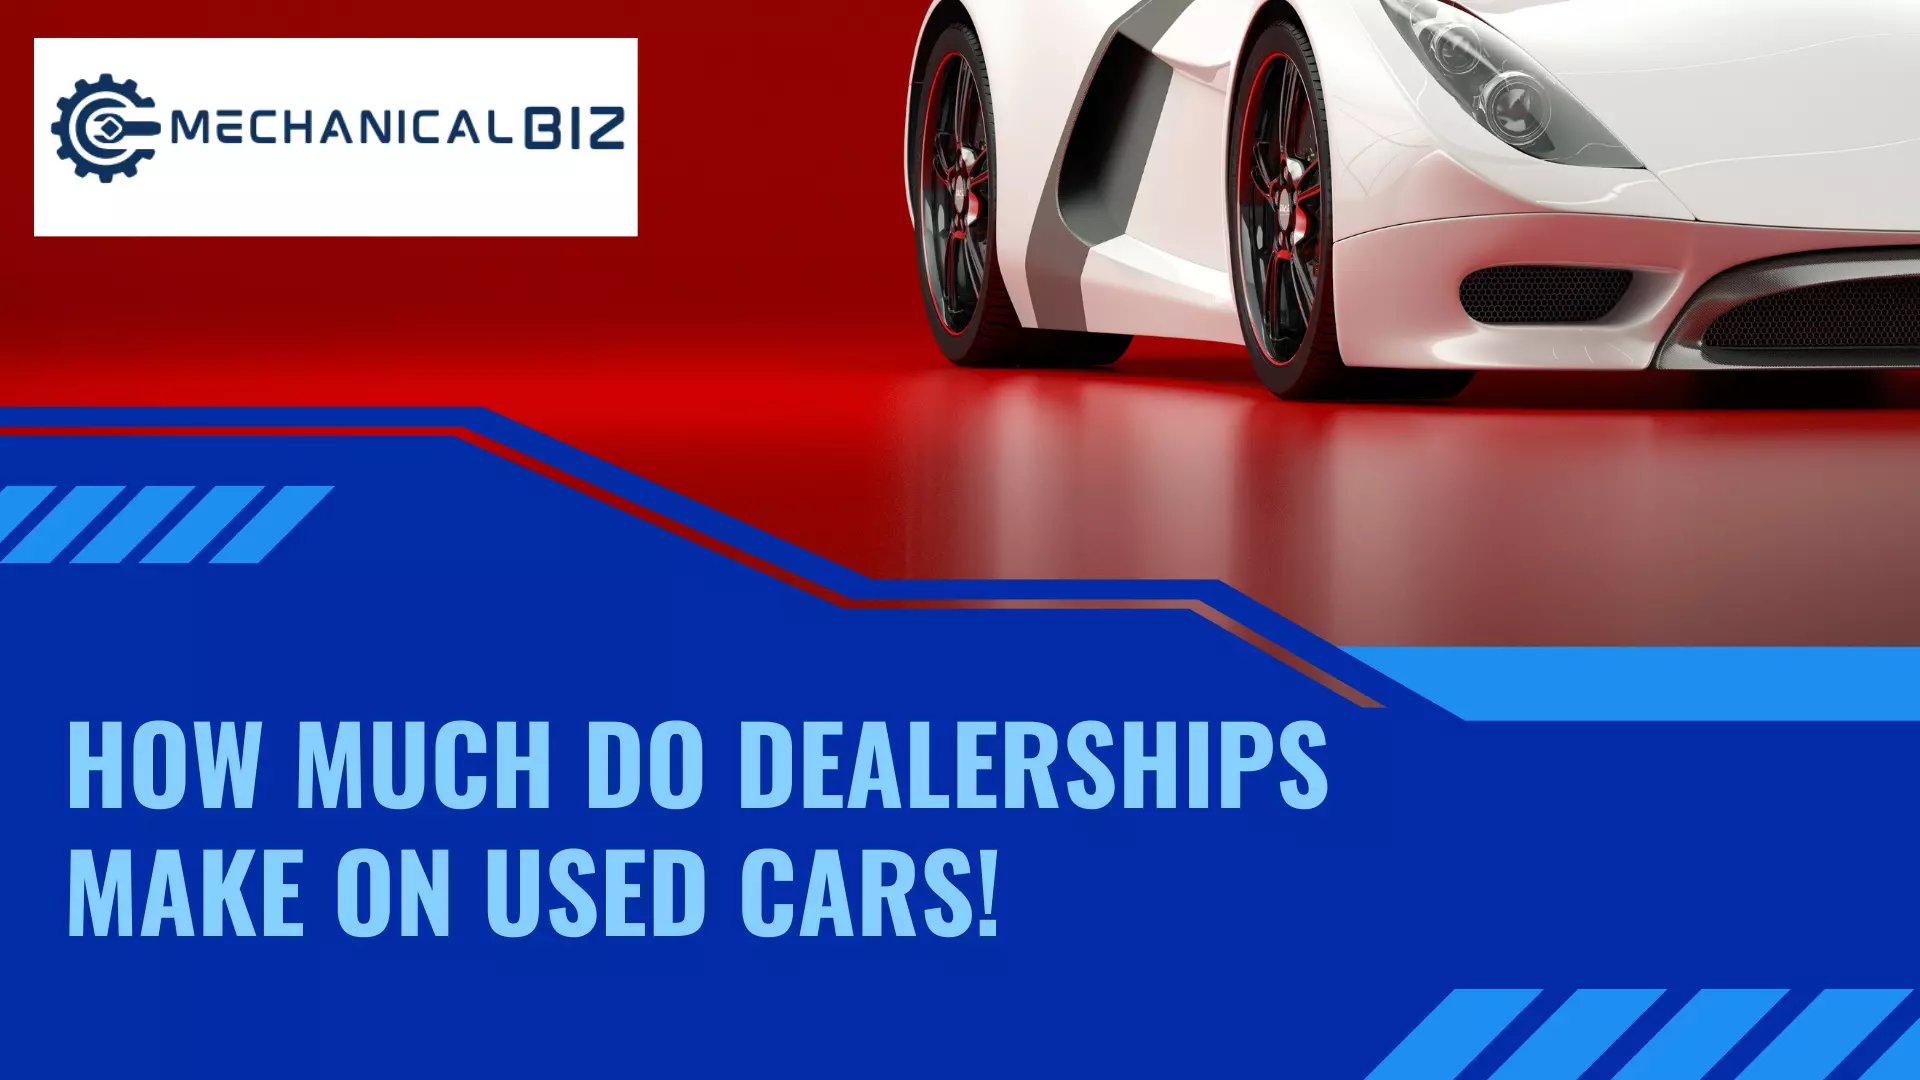 How Much Do Dealerships Make on Used Cars